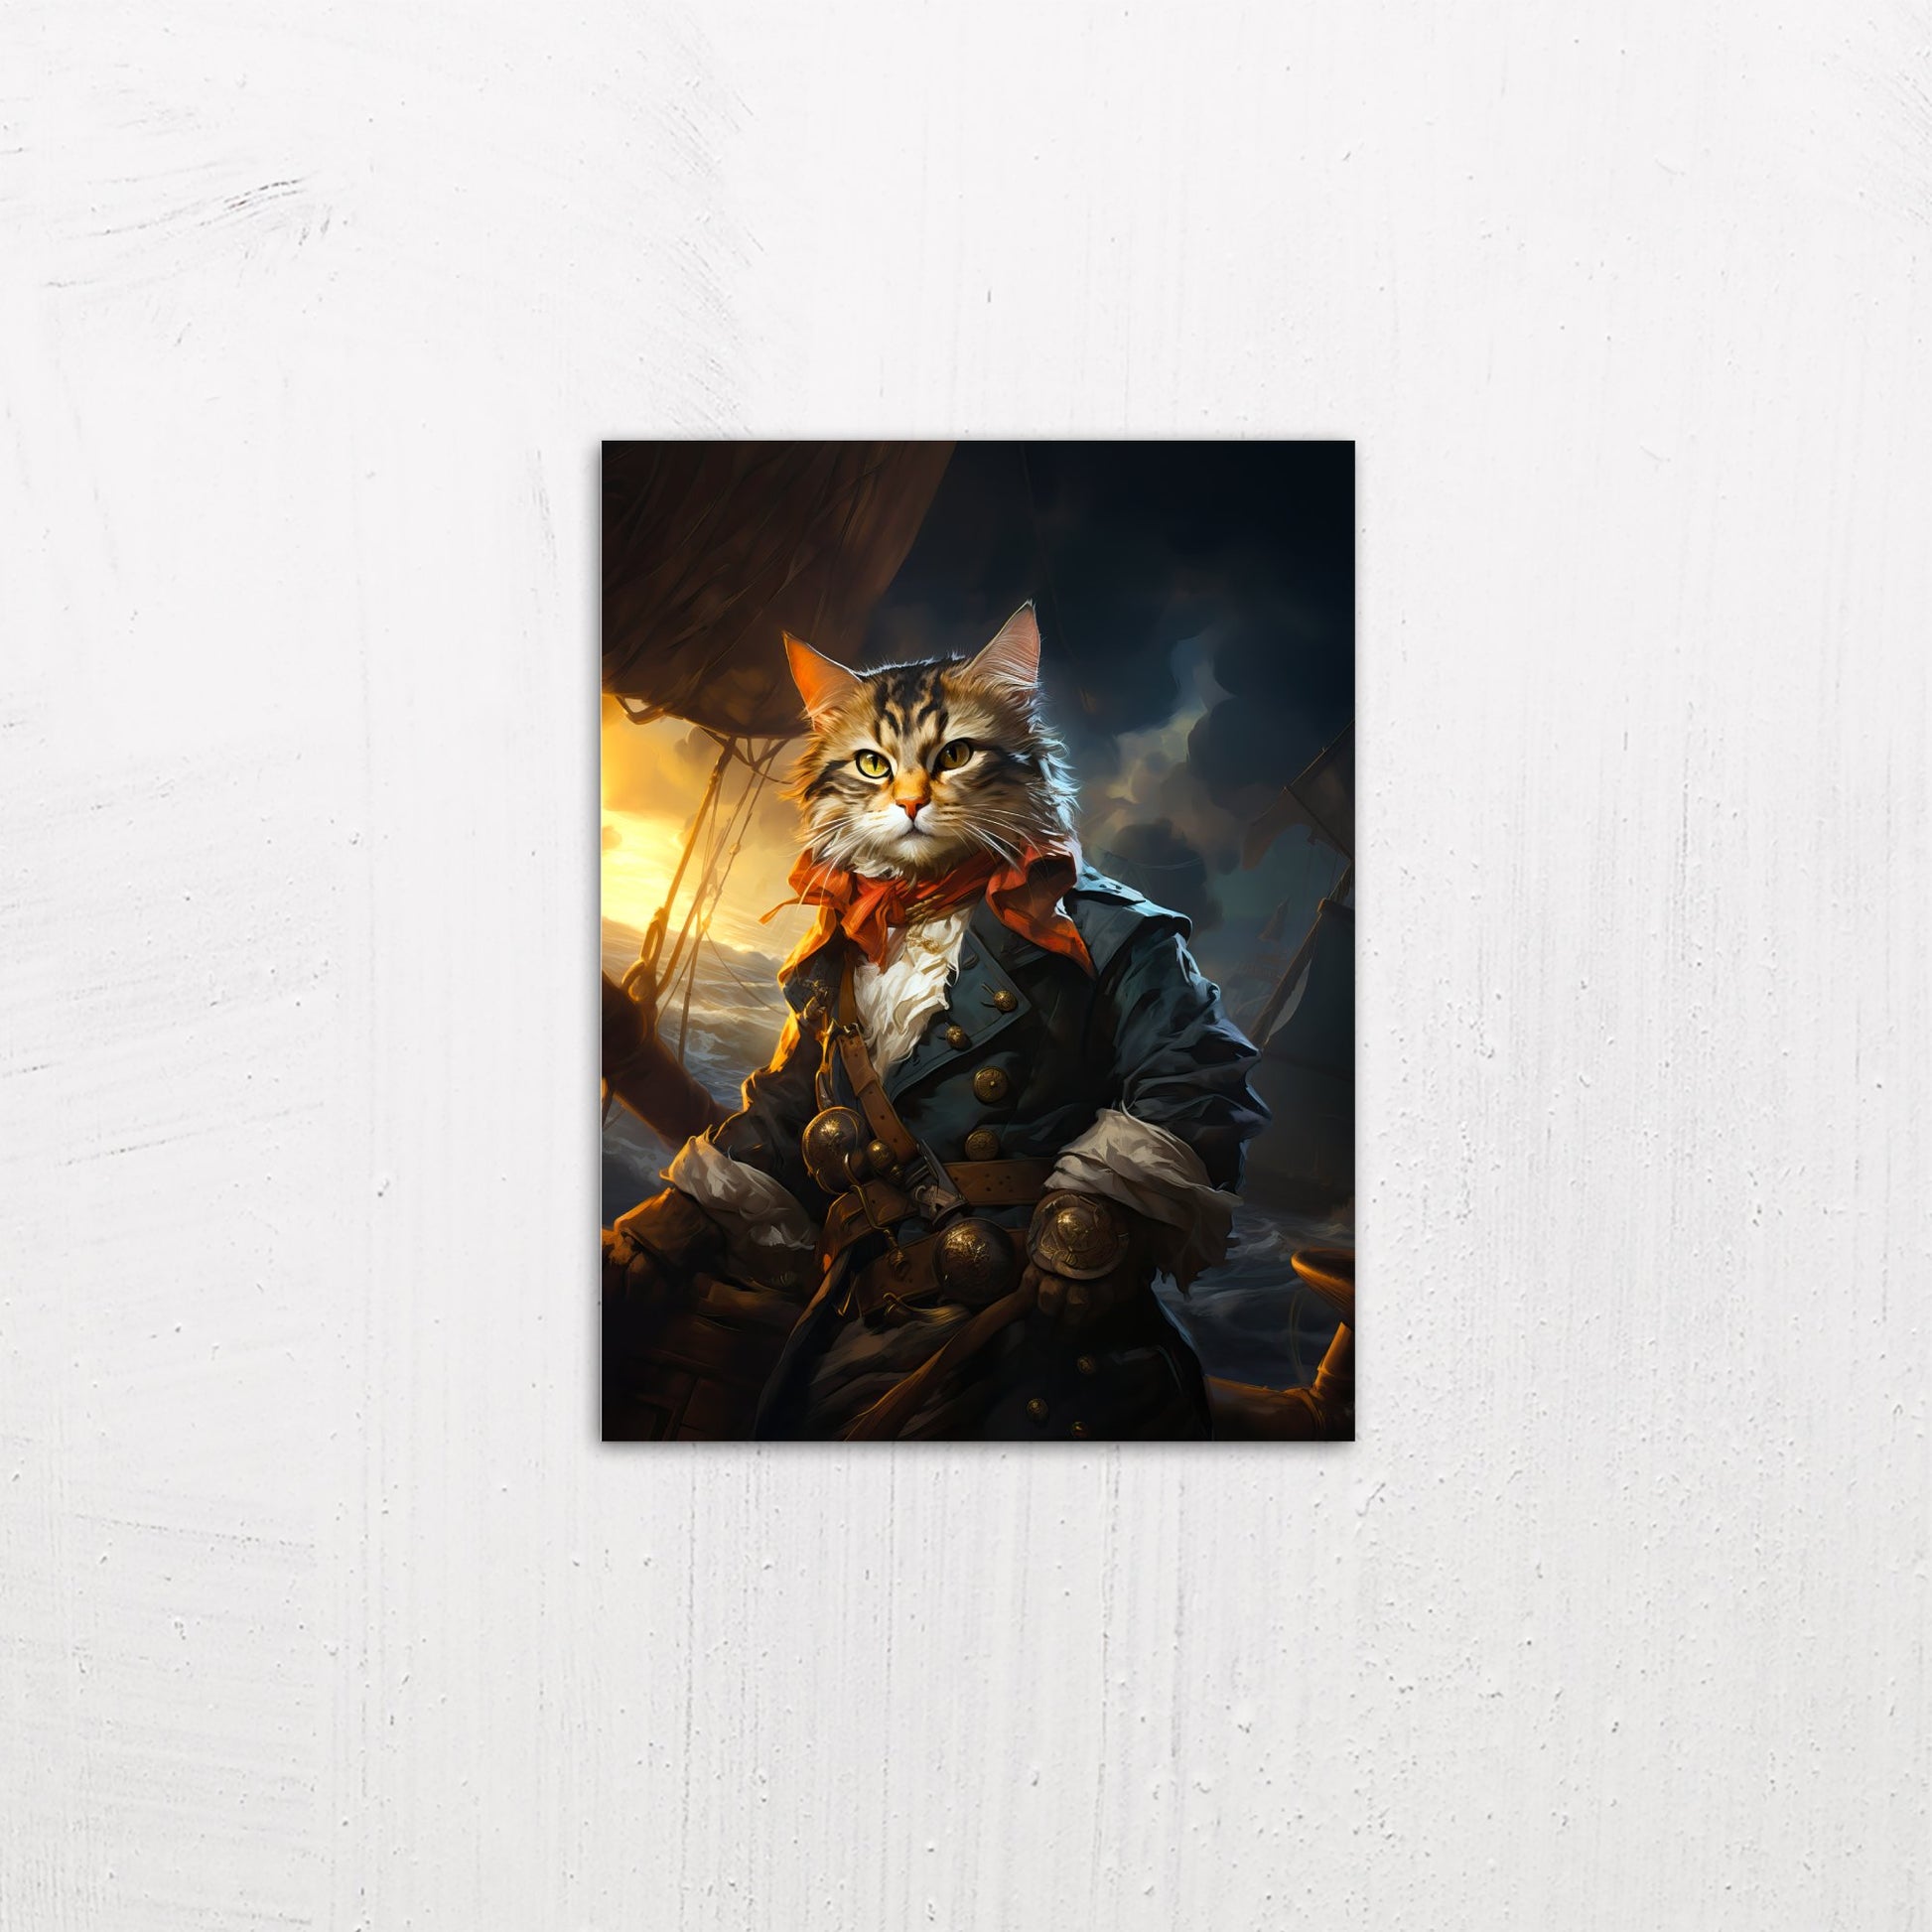 A small size metal art poster display plate with printed design of a Pet Portraits - Pirate Cat Painting